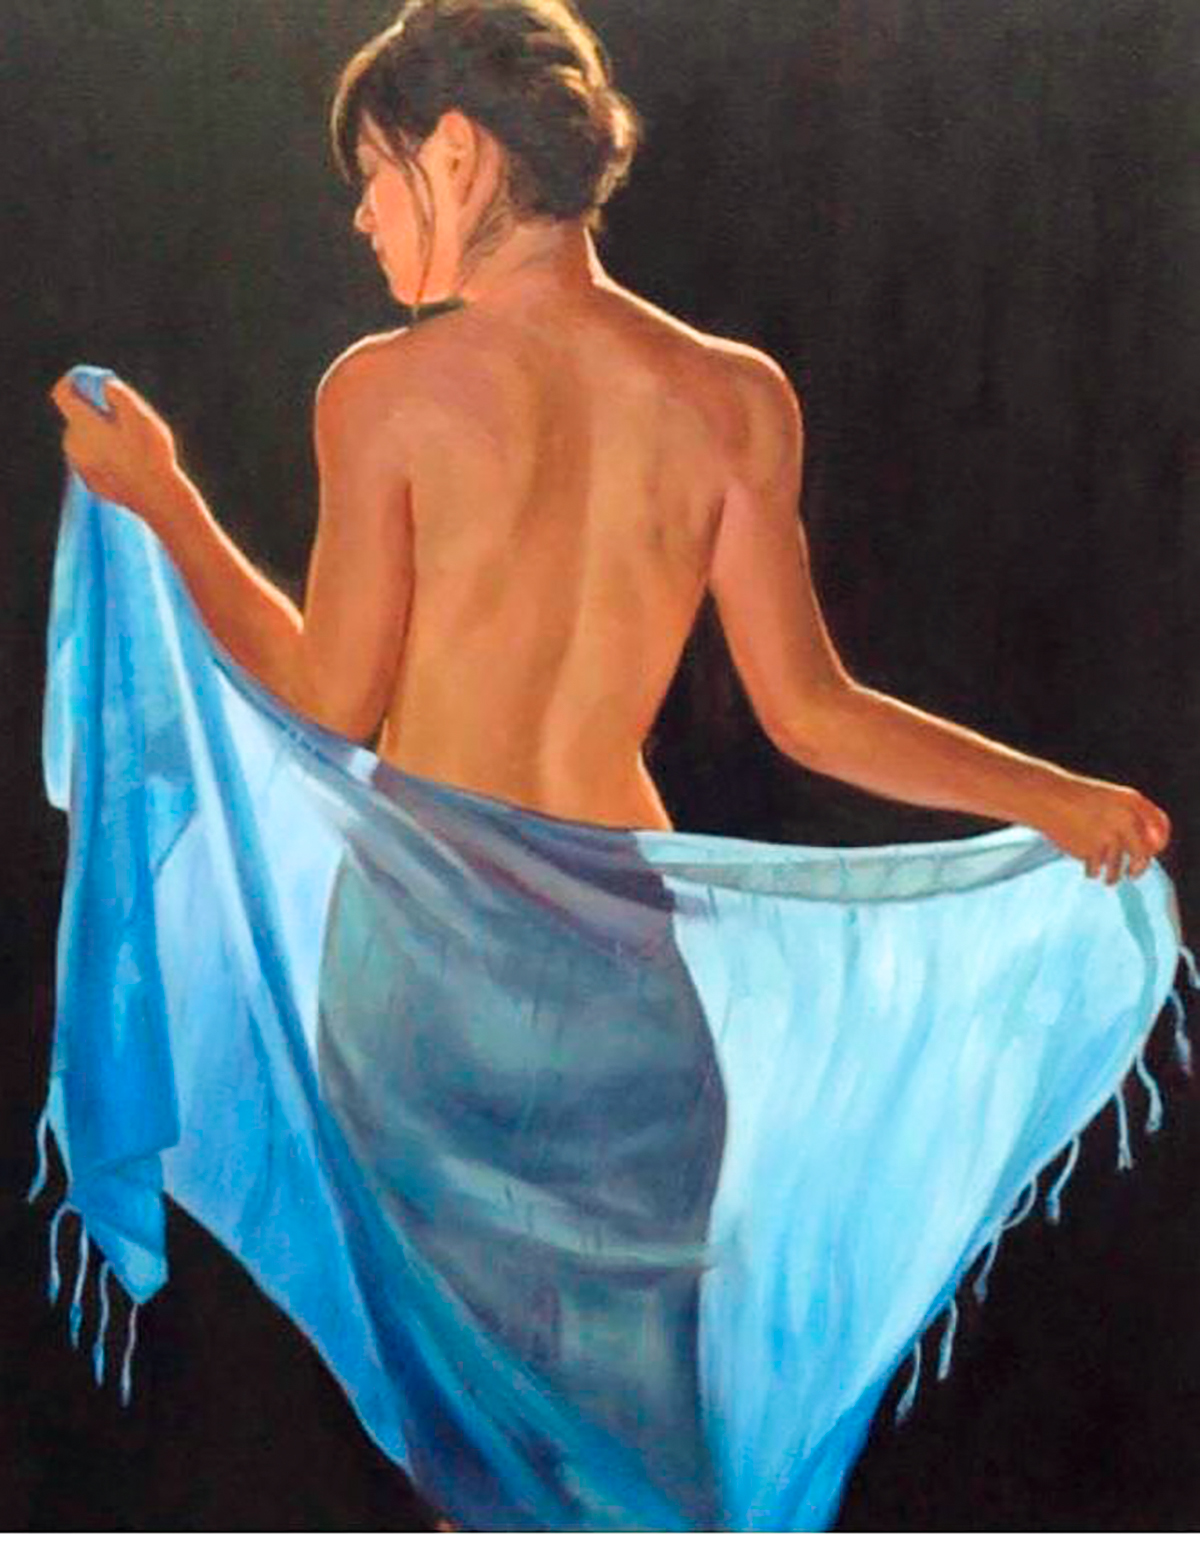 The Blue Scarf, 2012. This painting was included in the show Women Creating Women that Kirkland put on with Columbia artist Bonnie Goldberg. In this show, they celebrated the women they love to paint as a way to celebrate all women, everywhere. 